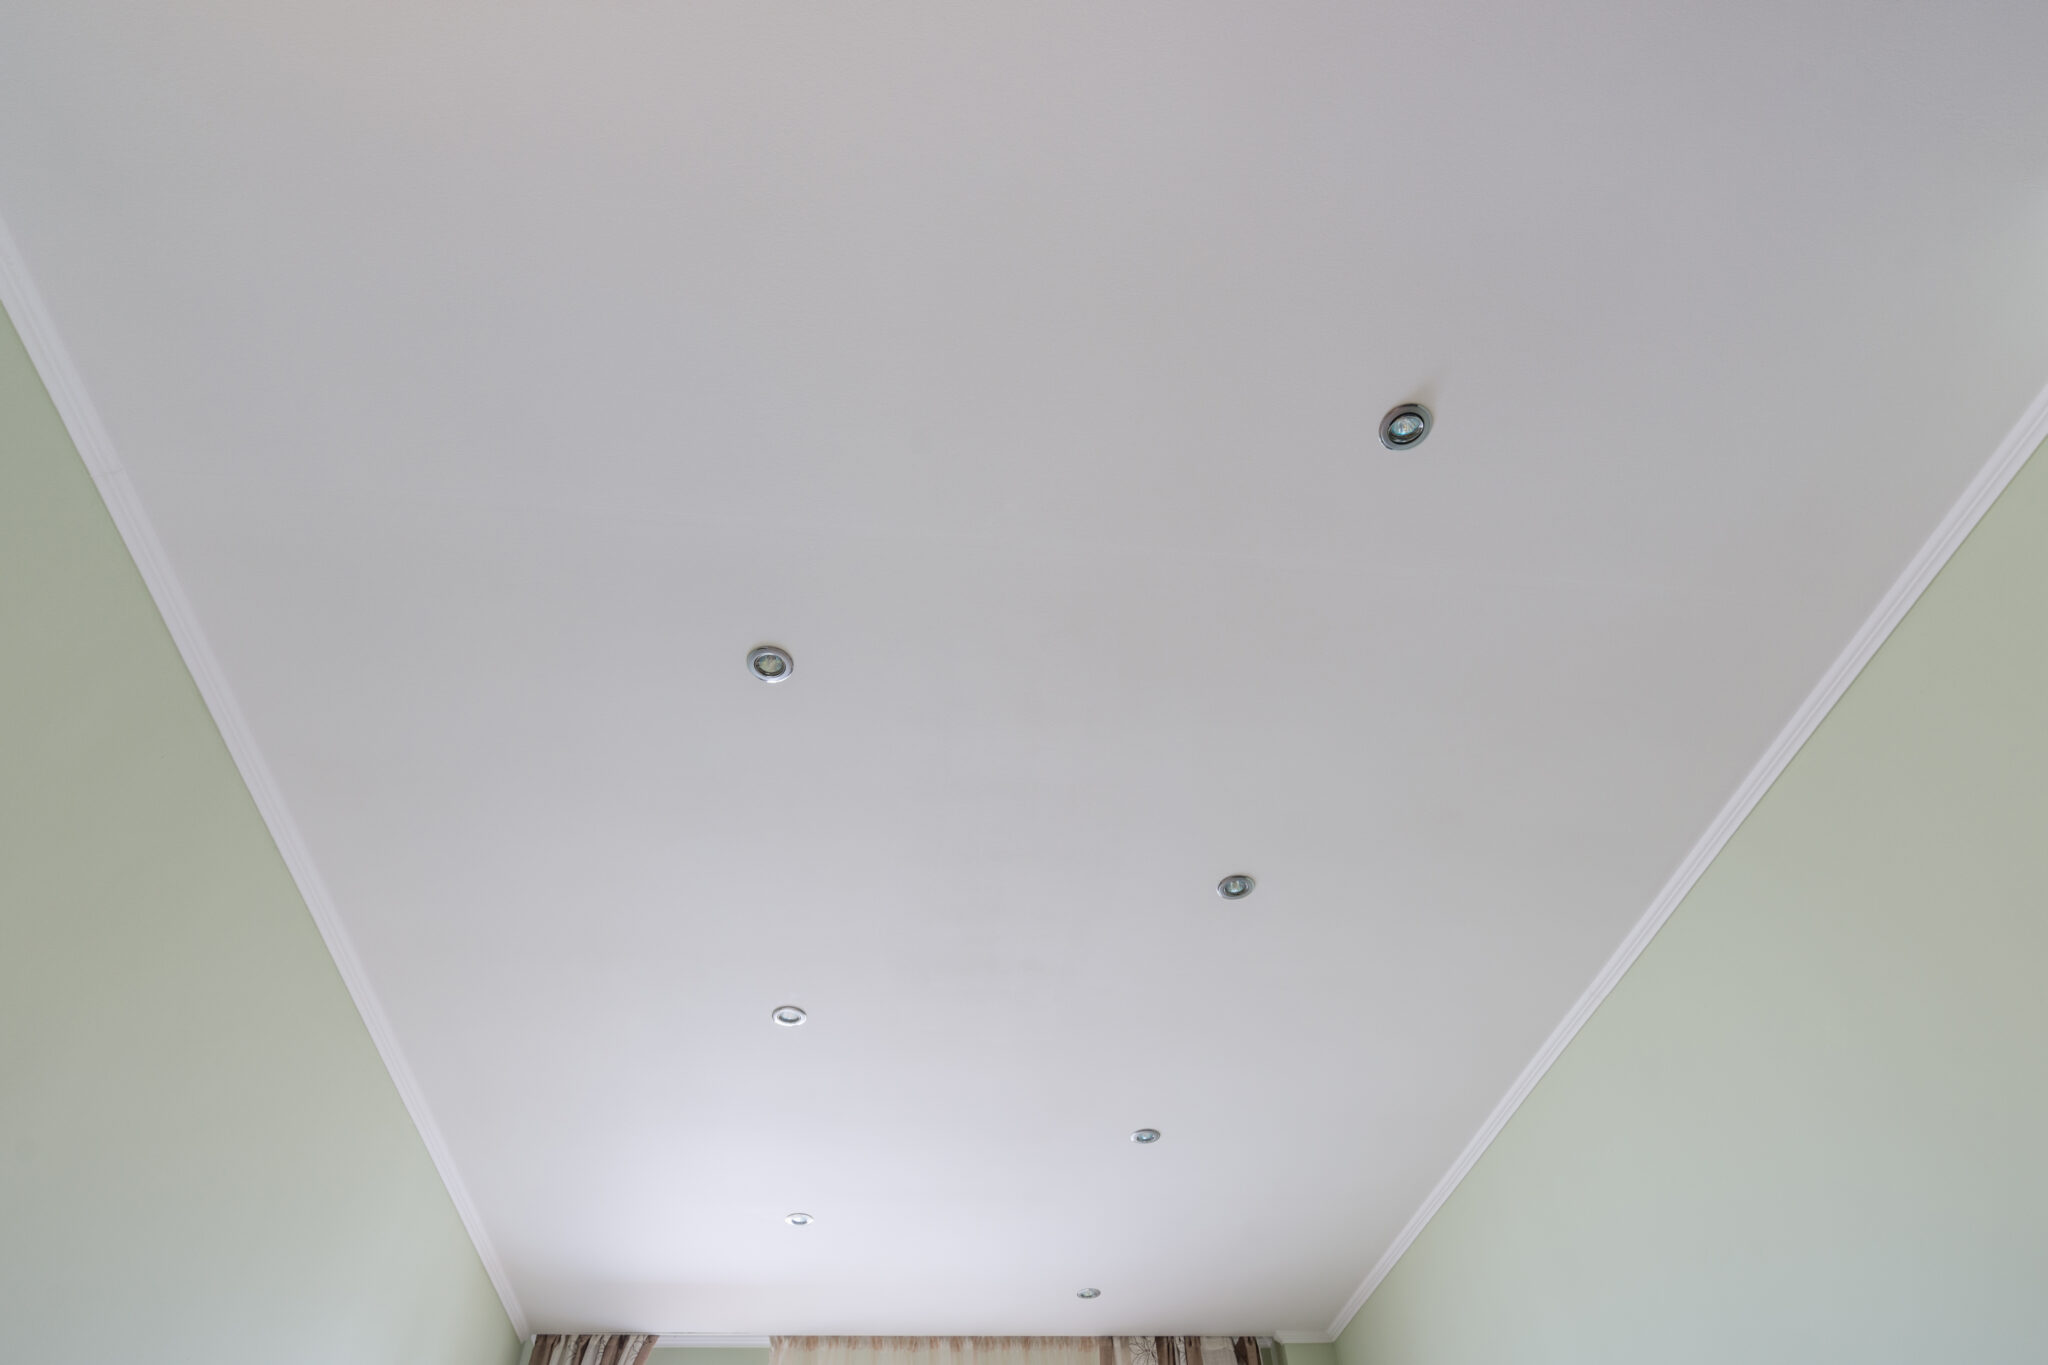 Lined false ceiling in the room